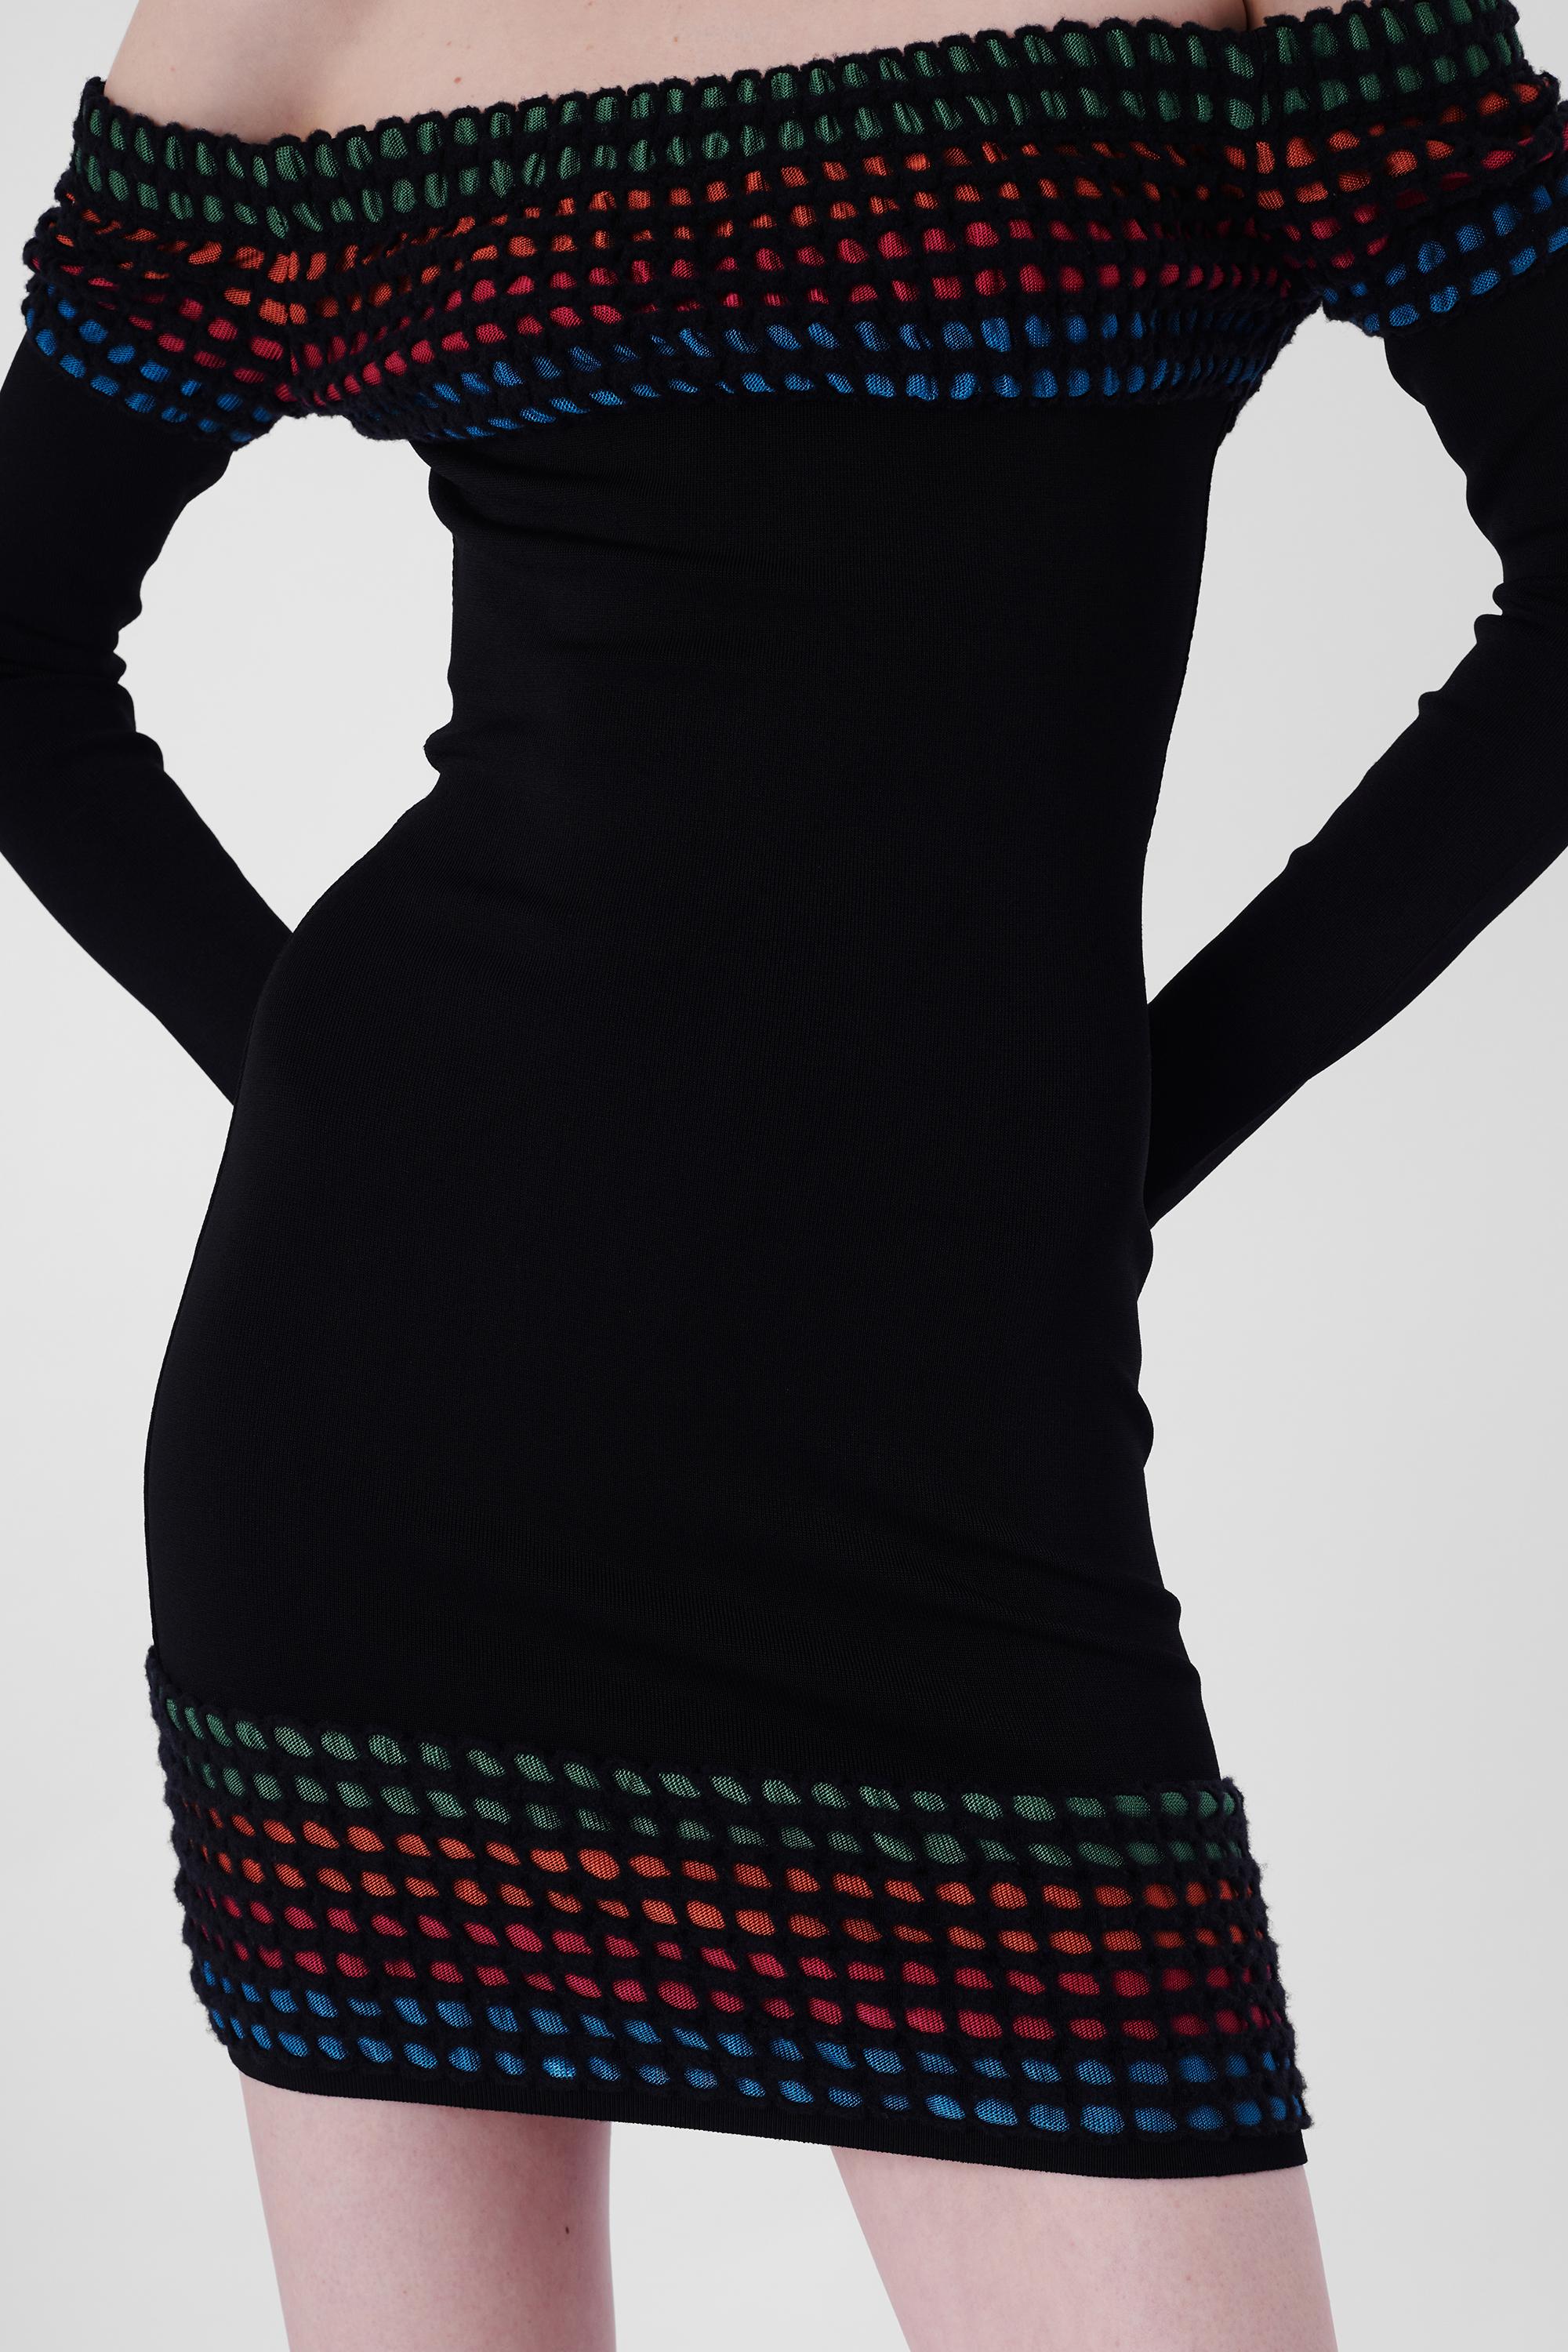 Alaia 1990's Black Contour Bodycon Dress In Excellent Condition For Sale In London, GB